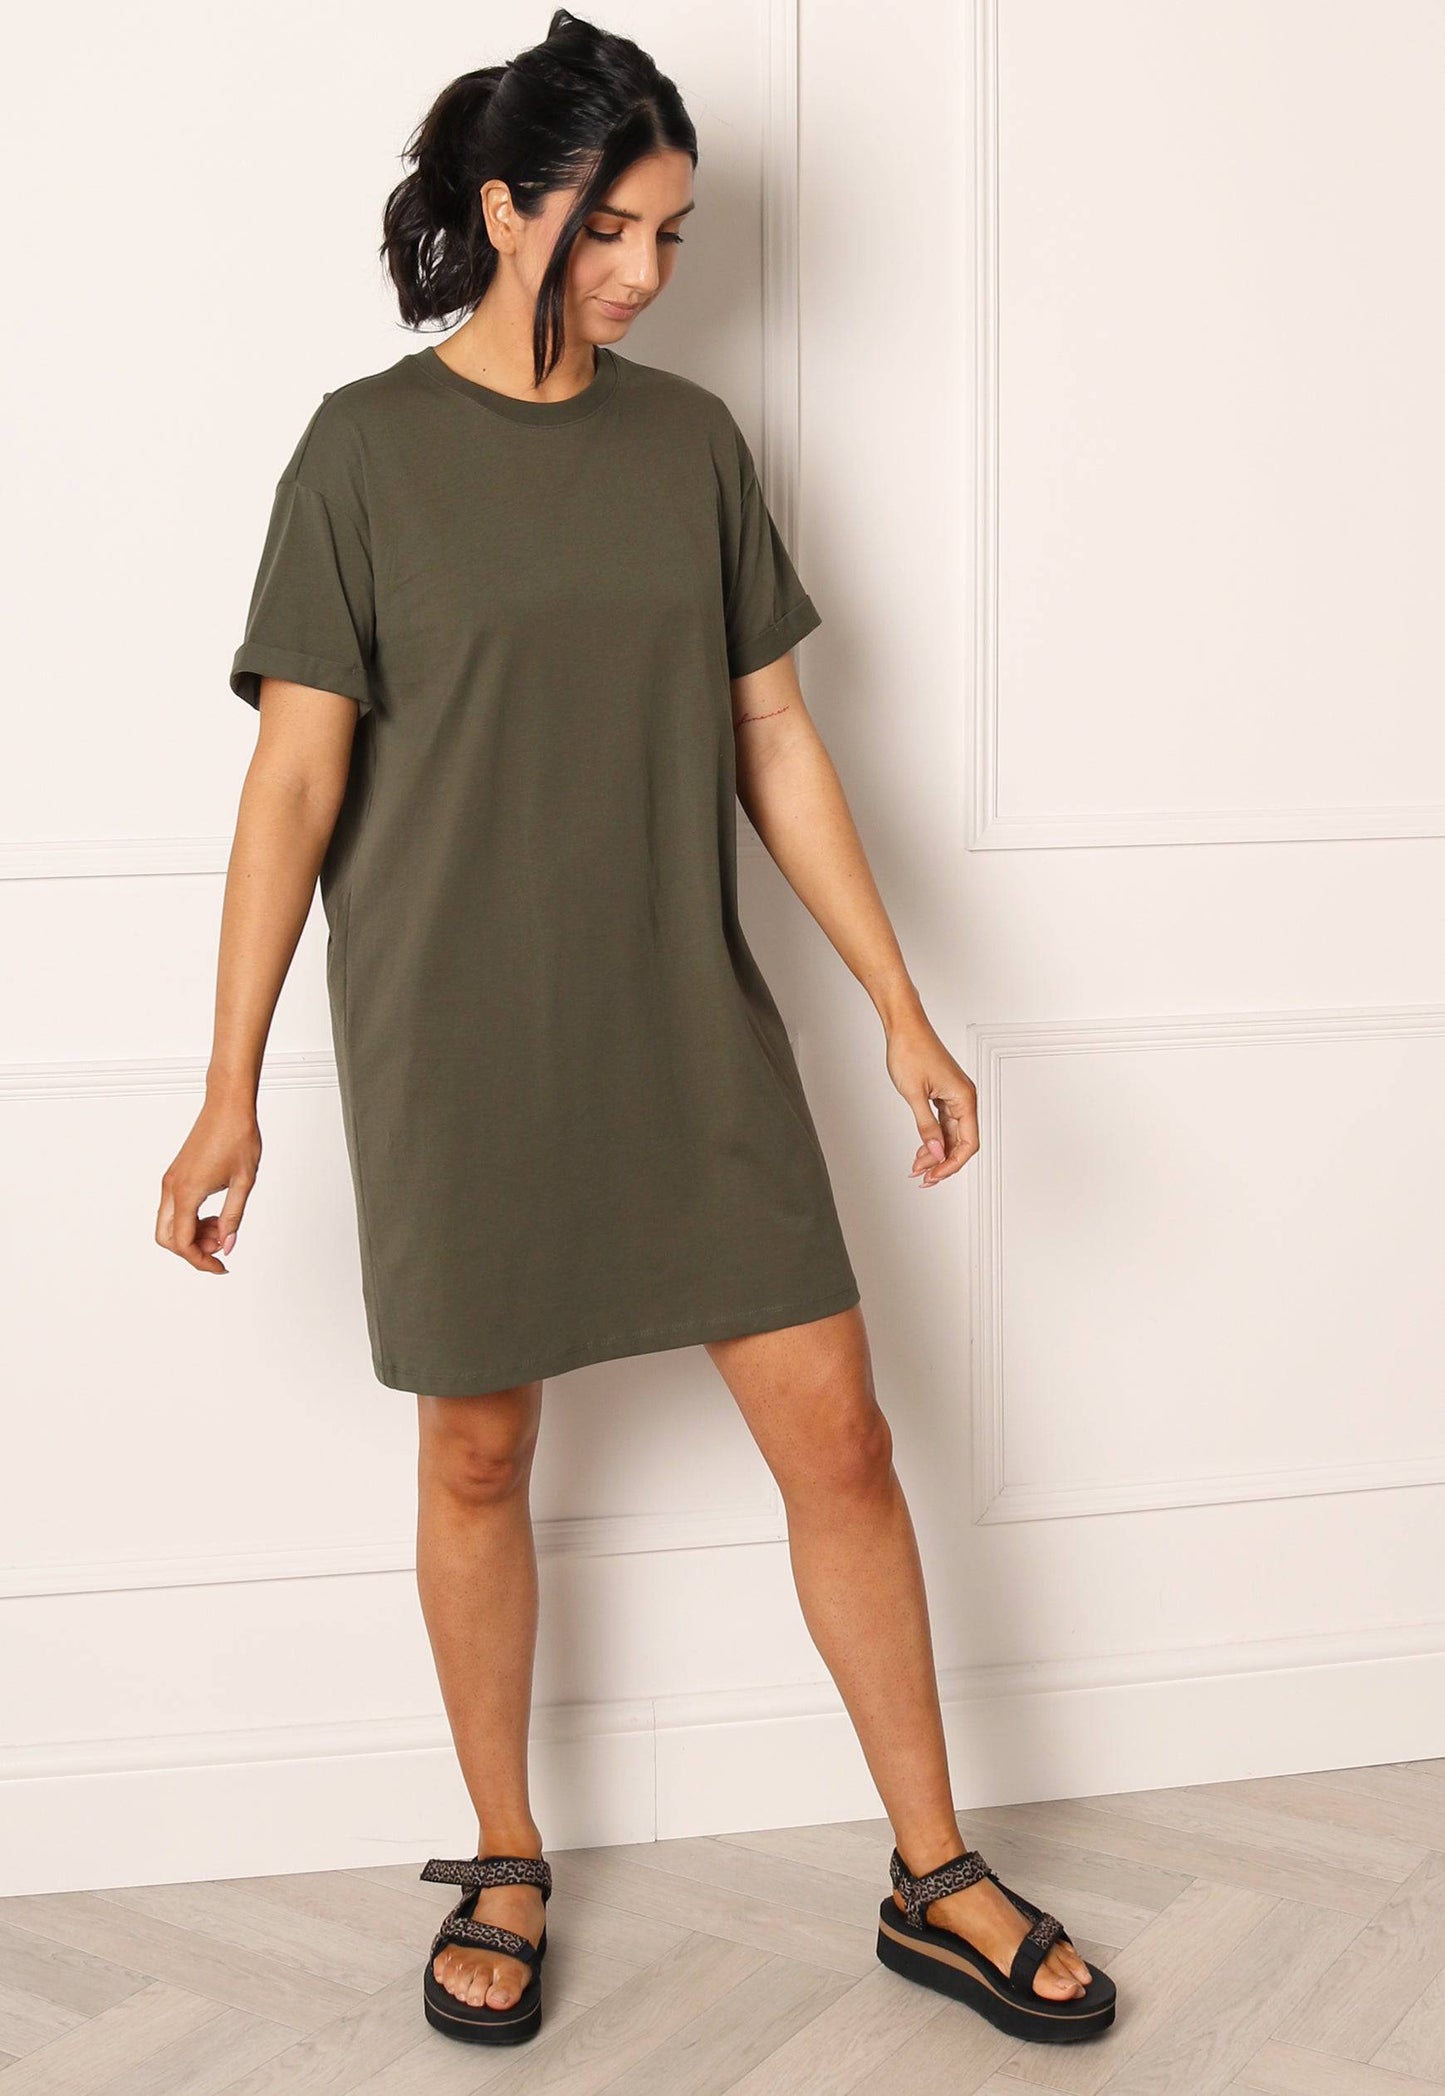 
                  
                    PIECES Ria Cotton T-Shirt Dress in Khaki - One Nation Clothing
                  
                